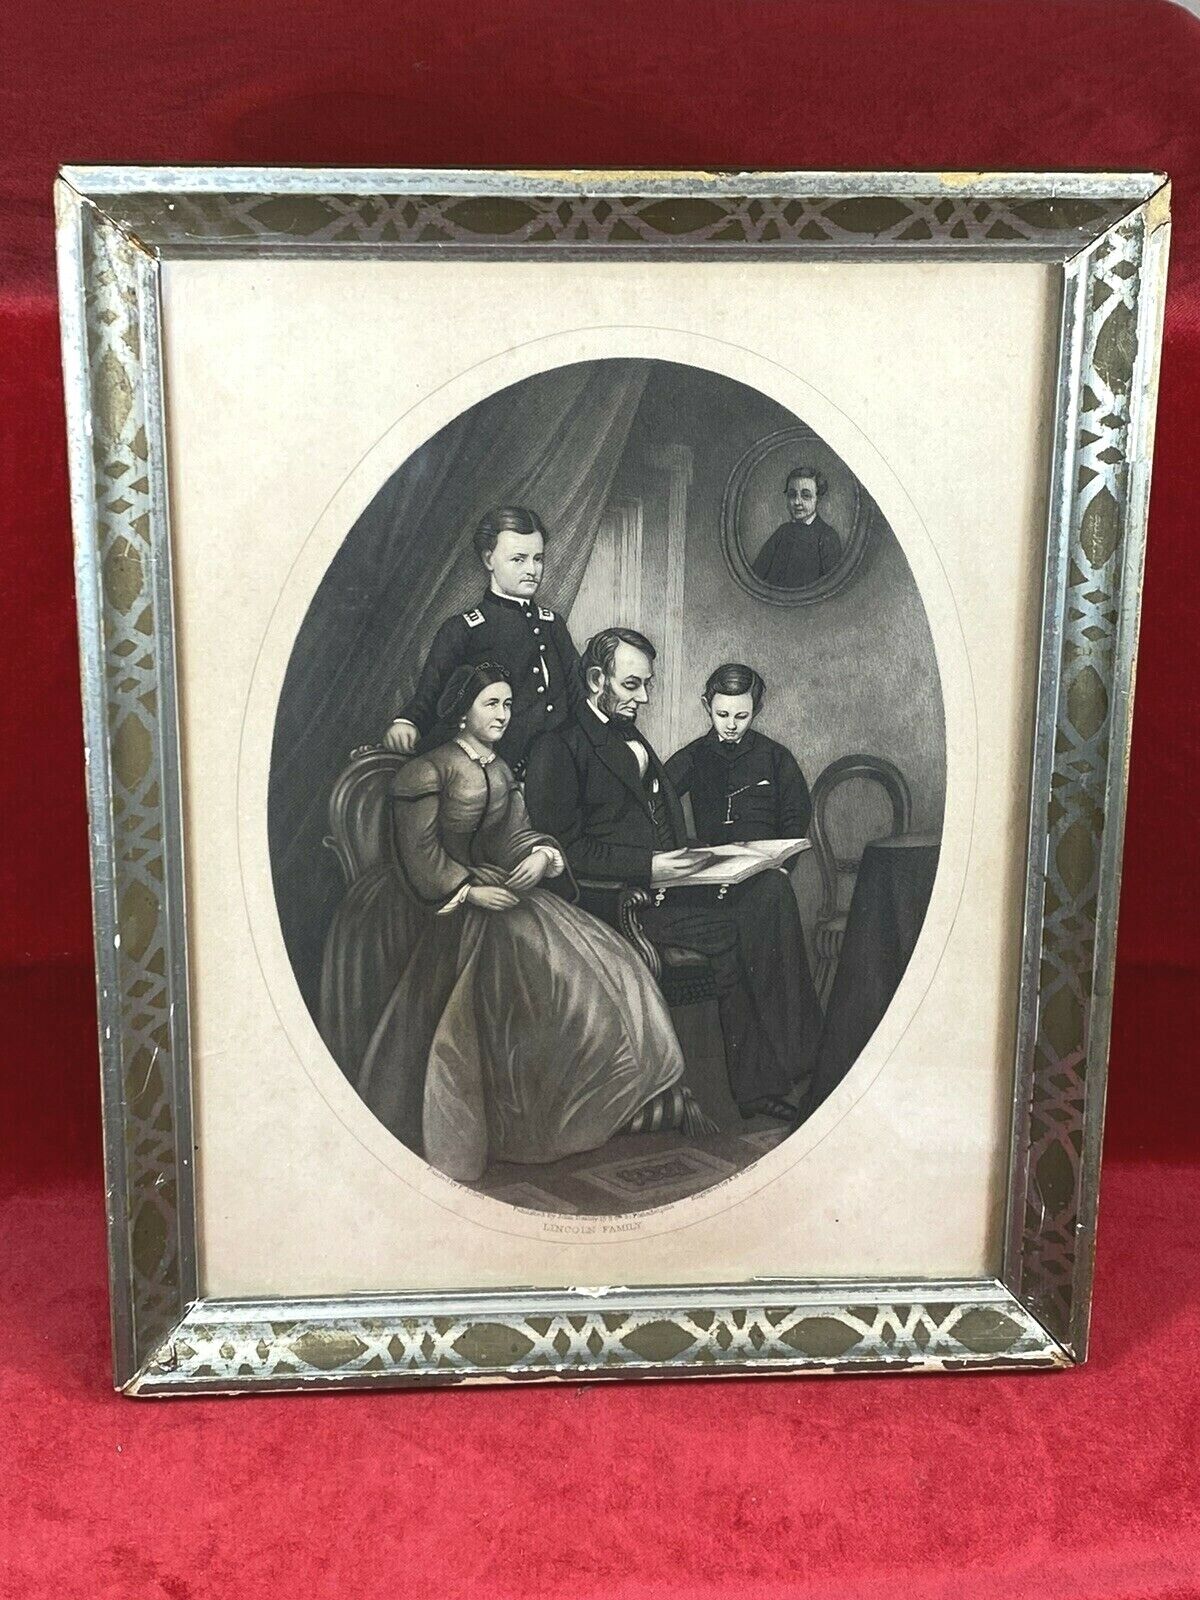 C.1868 LINCOLN FAMILY Steel Plate Engraving, A.B. Walter ~ John Dainty Publisher